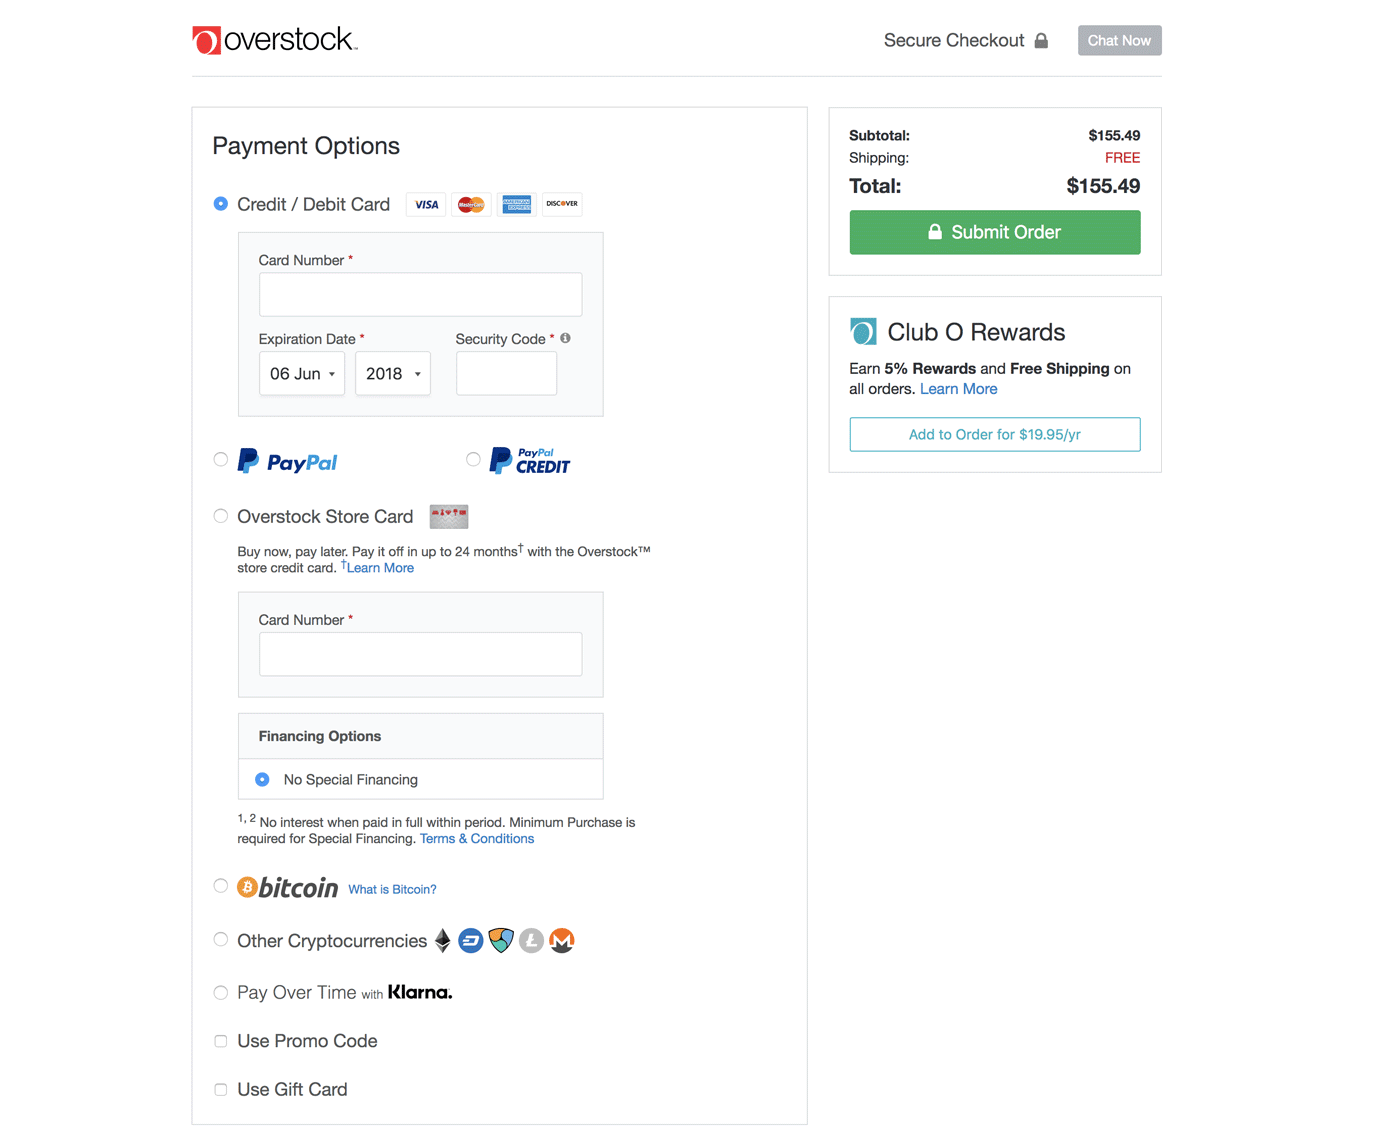 Image 3 overstockpayment offers flexible payment option including paypal and cryptocurrency